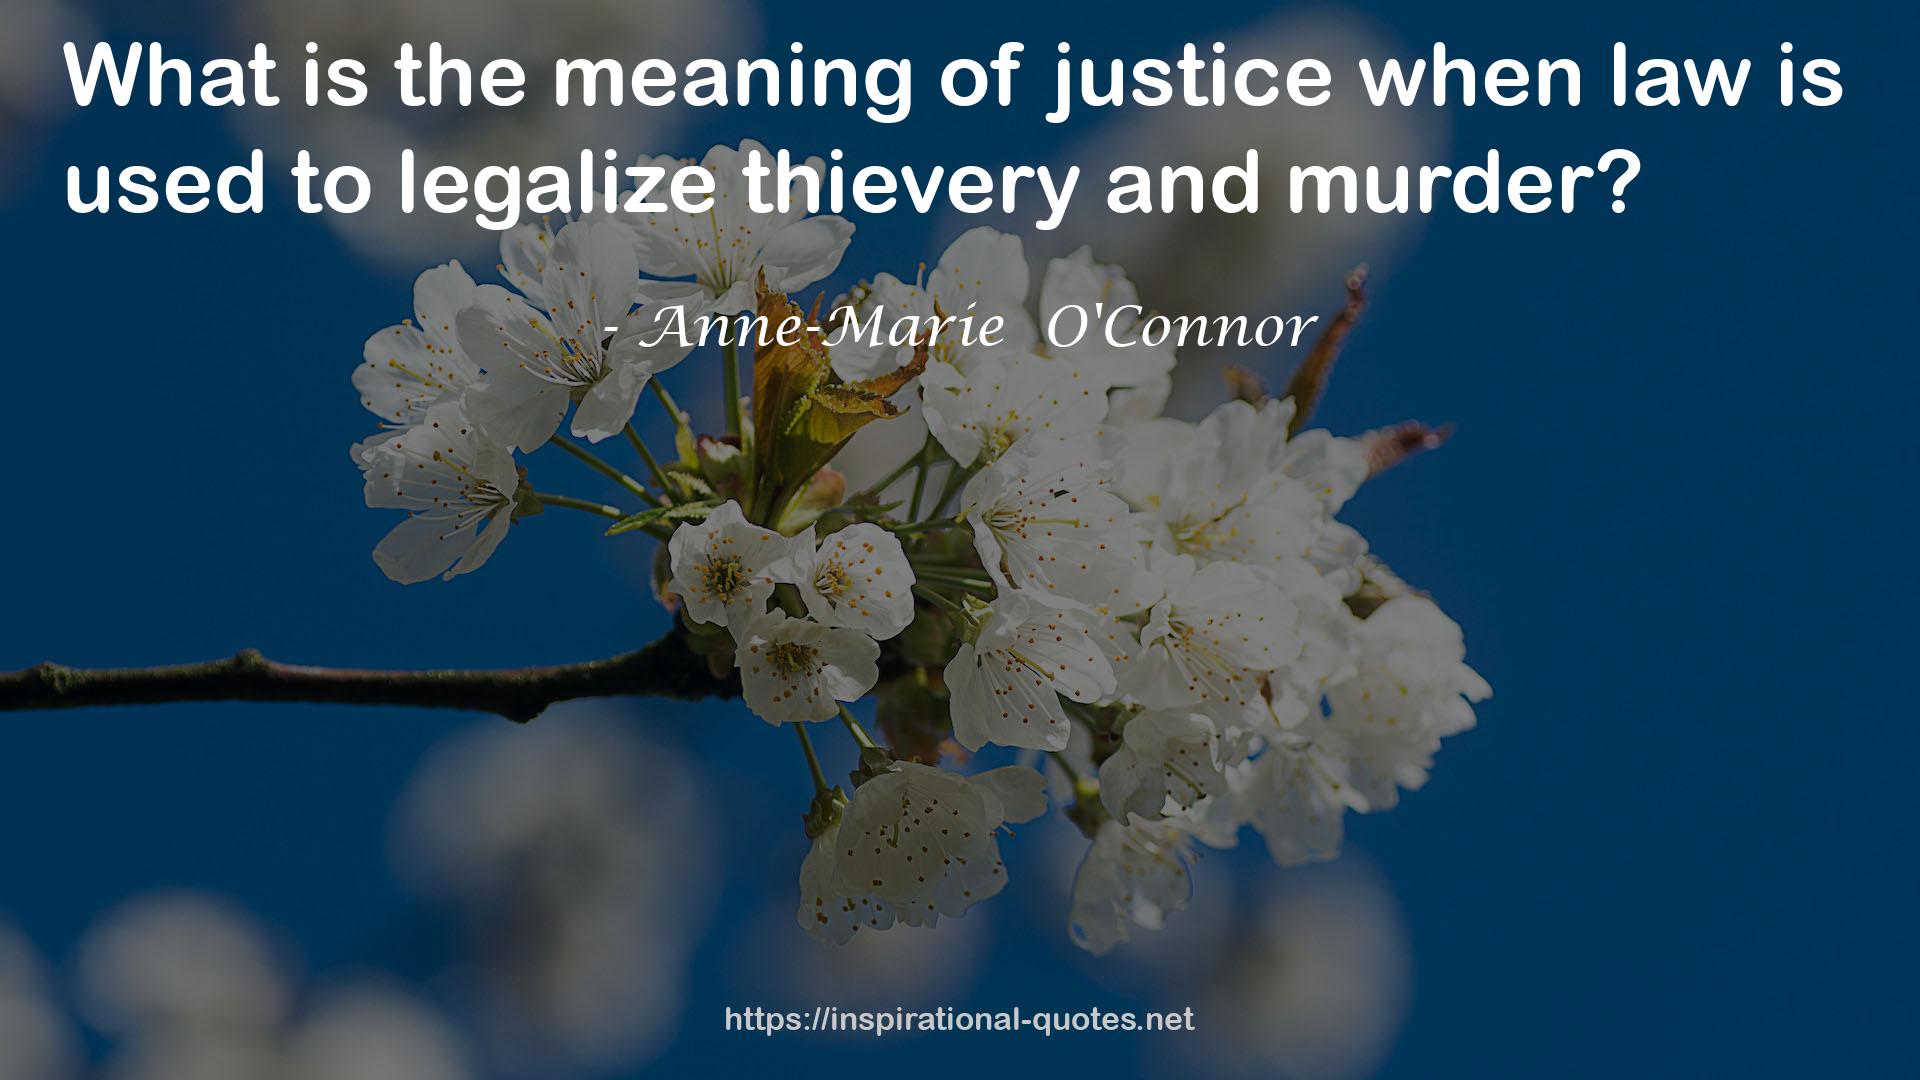 Anne-Marie  O'Connor QUOTES